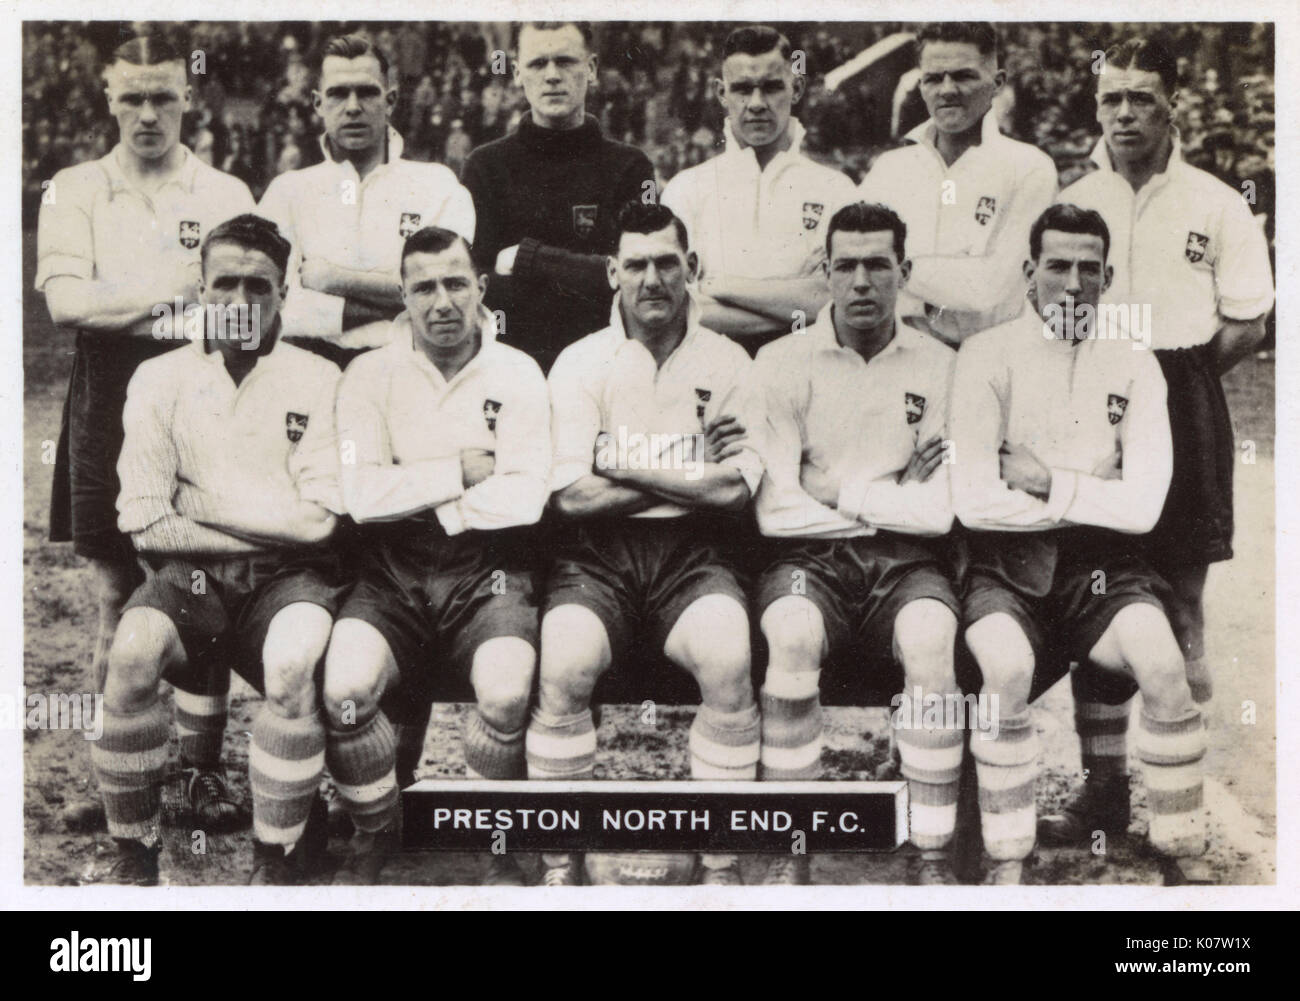 Preston North End FC football team 1936. Back row: Shankly, Gallimore, Holdcroft, Lowe, Milne, Maxwell. Front row: Dougal, Beresford, Tremelling (Captain), O'Donnell, O'Donnell.     Date: 1936 Stock Photo